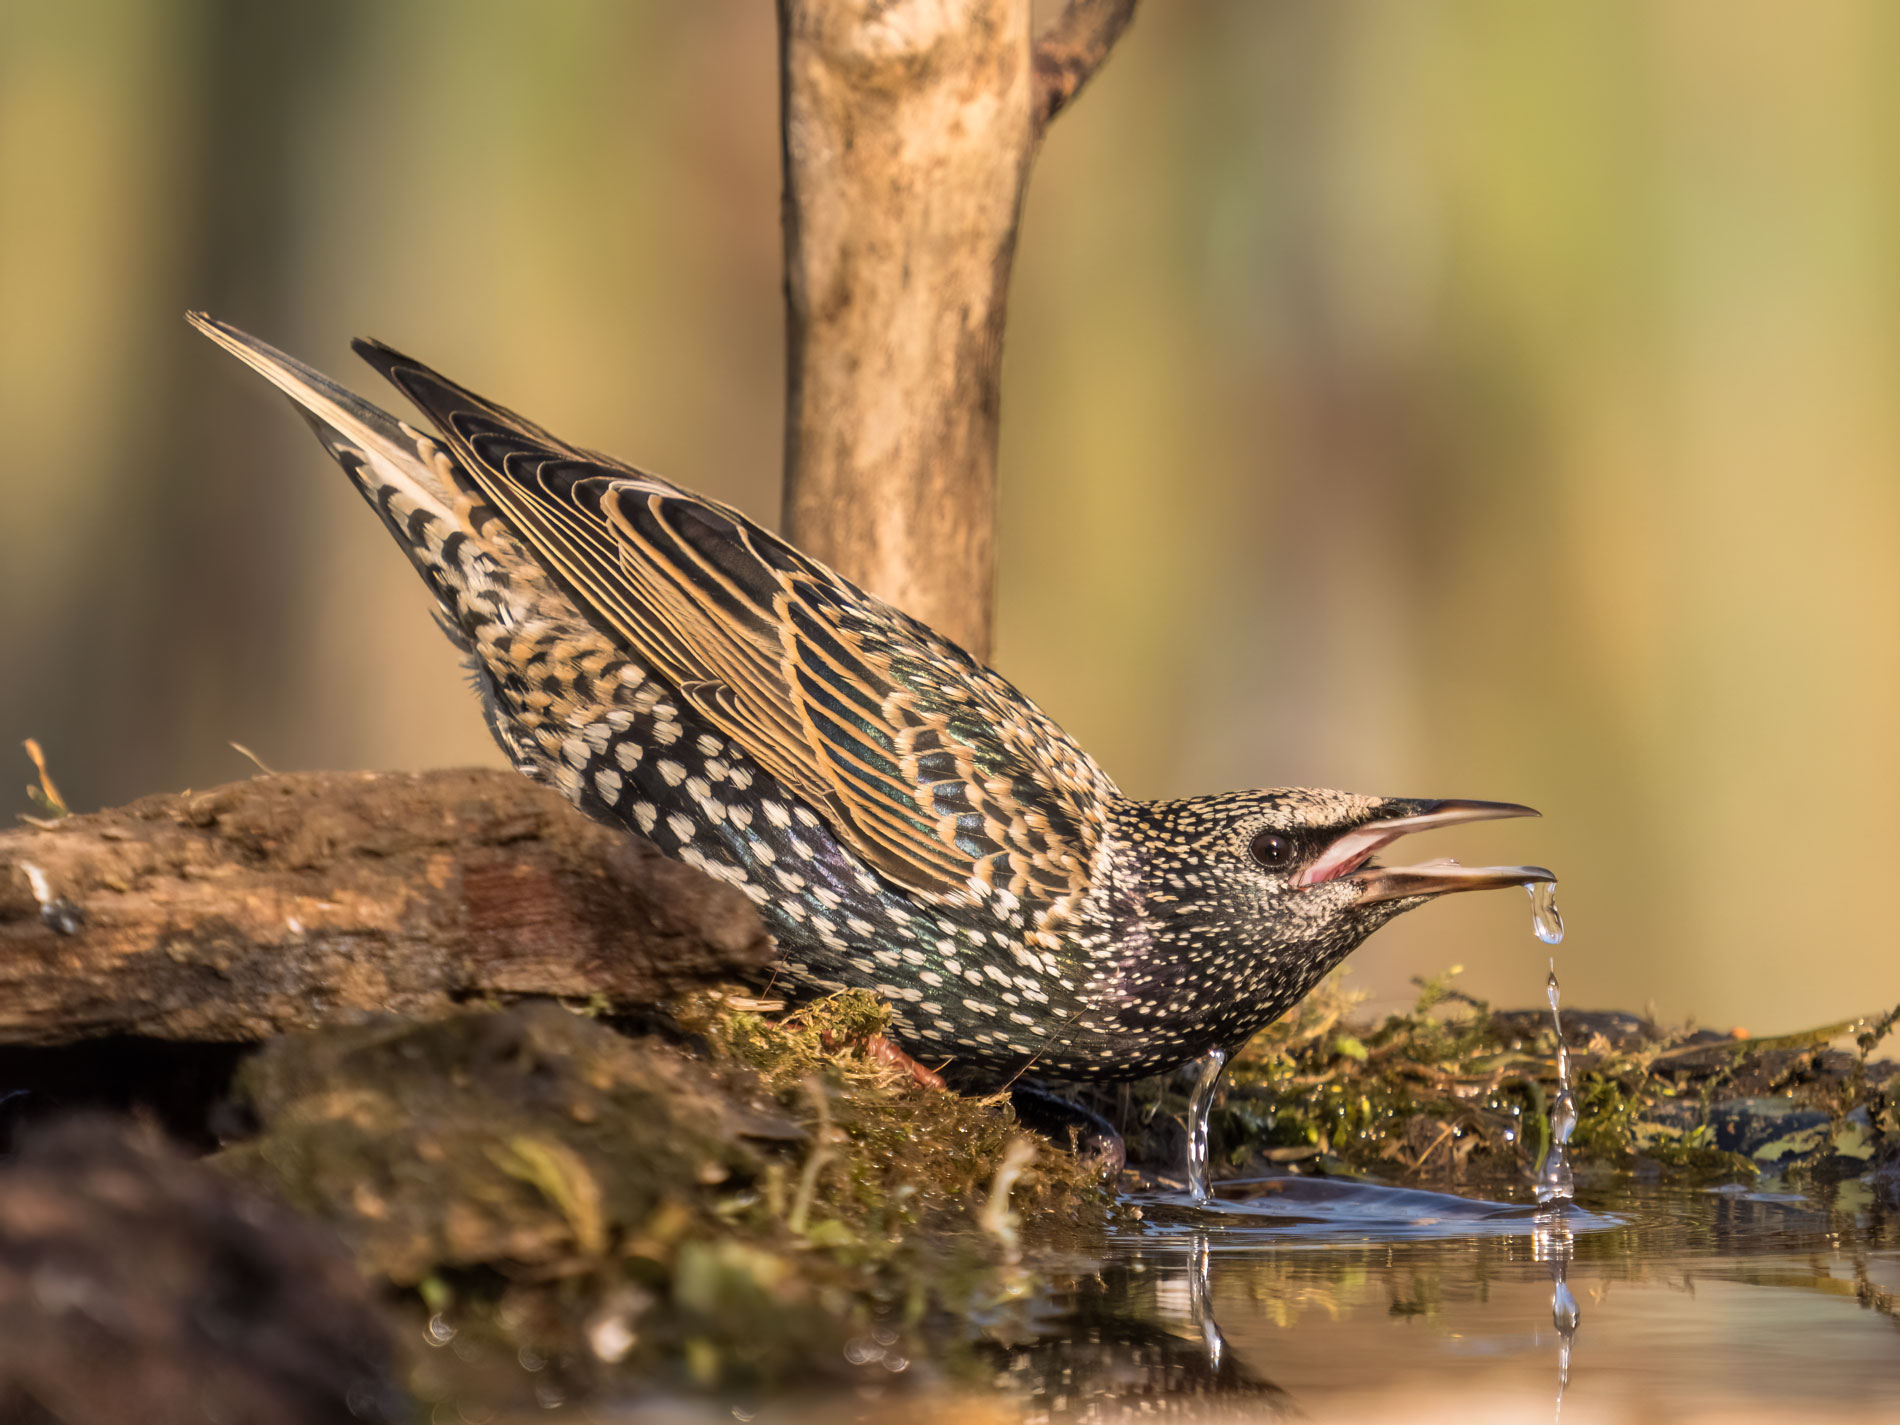 The watering of the starling...